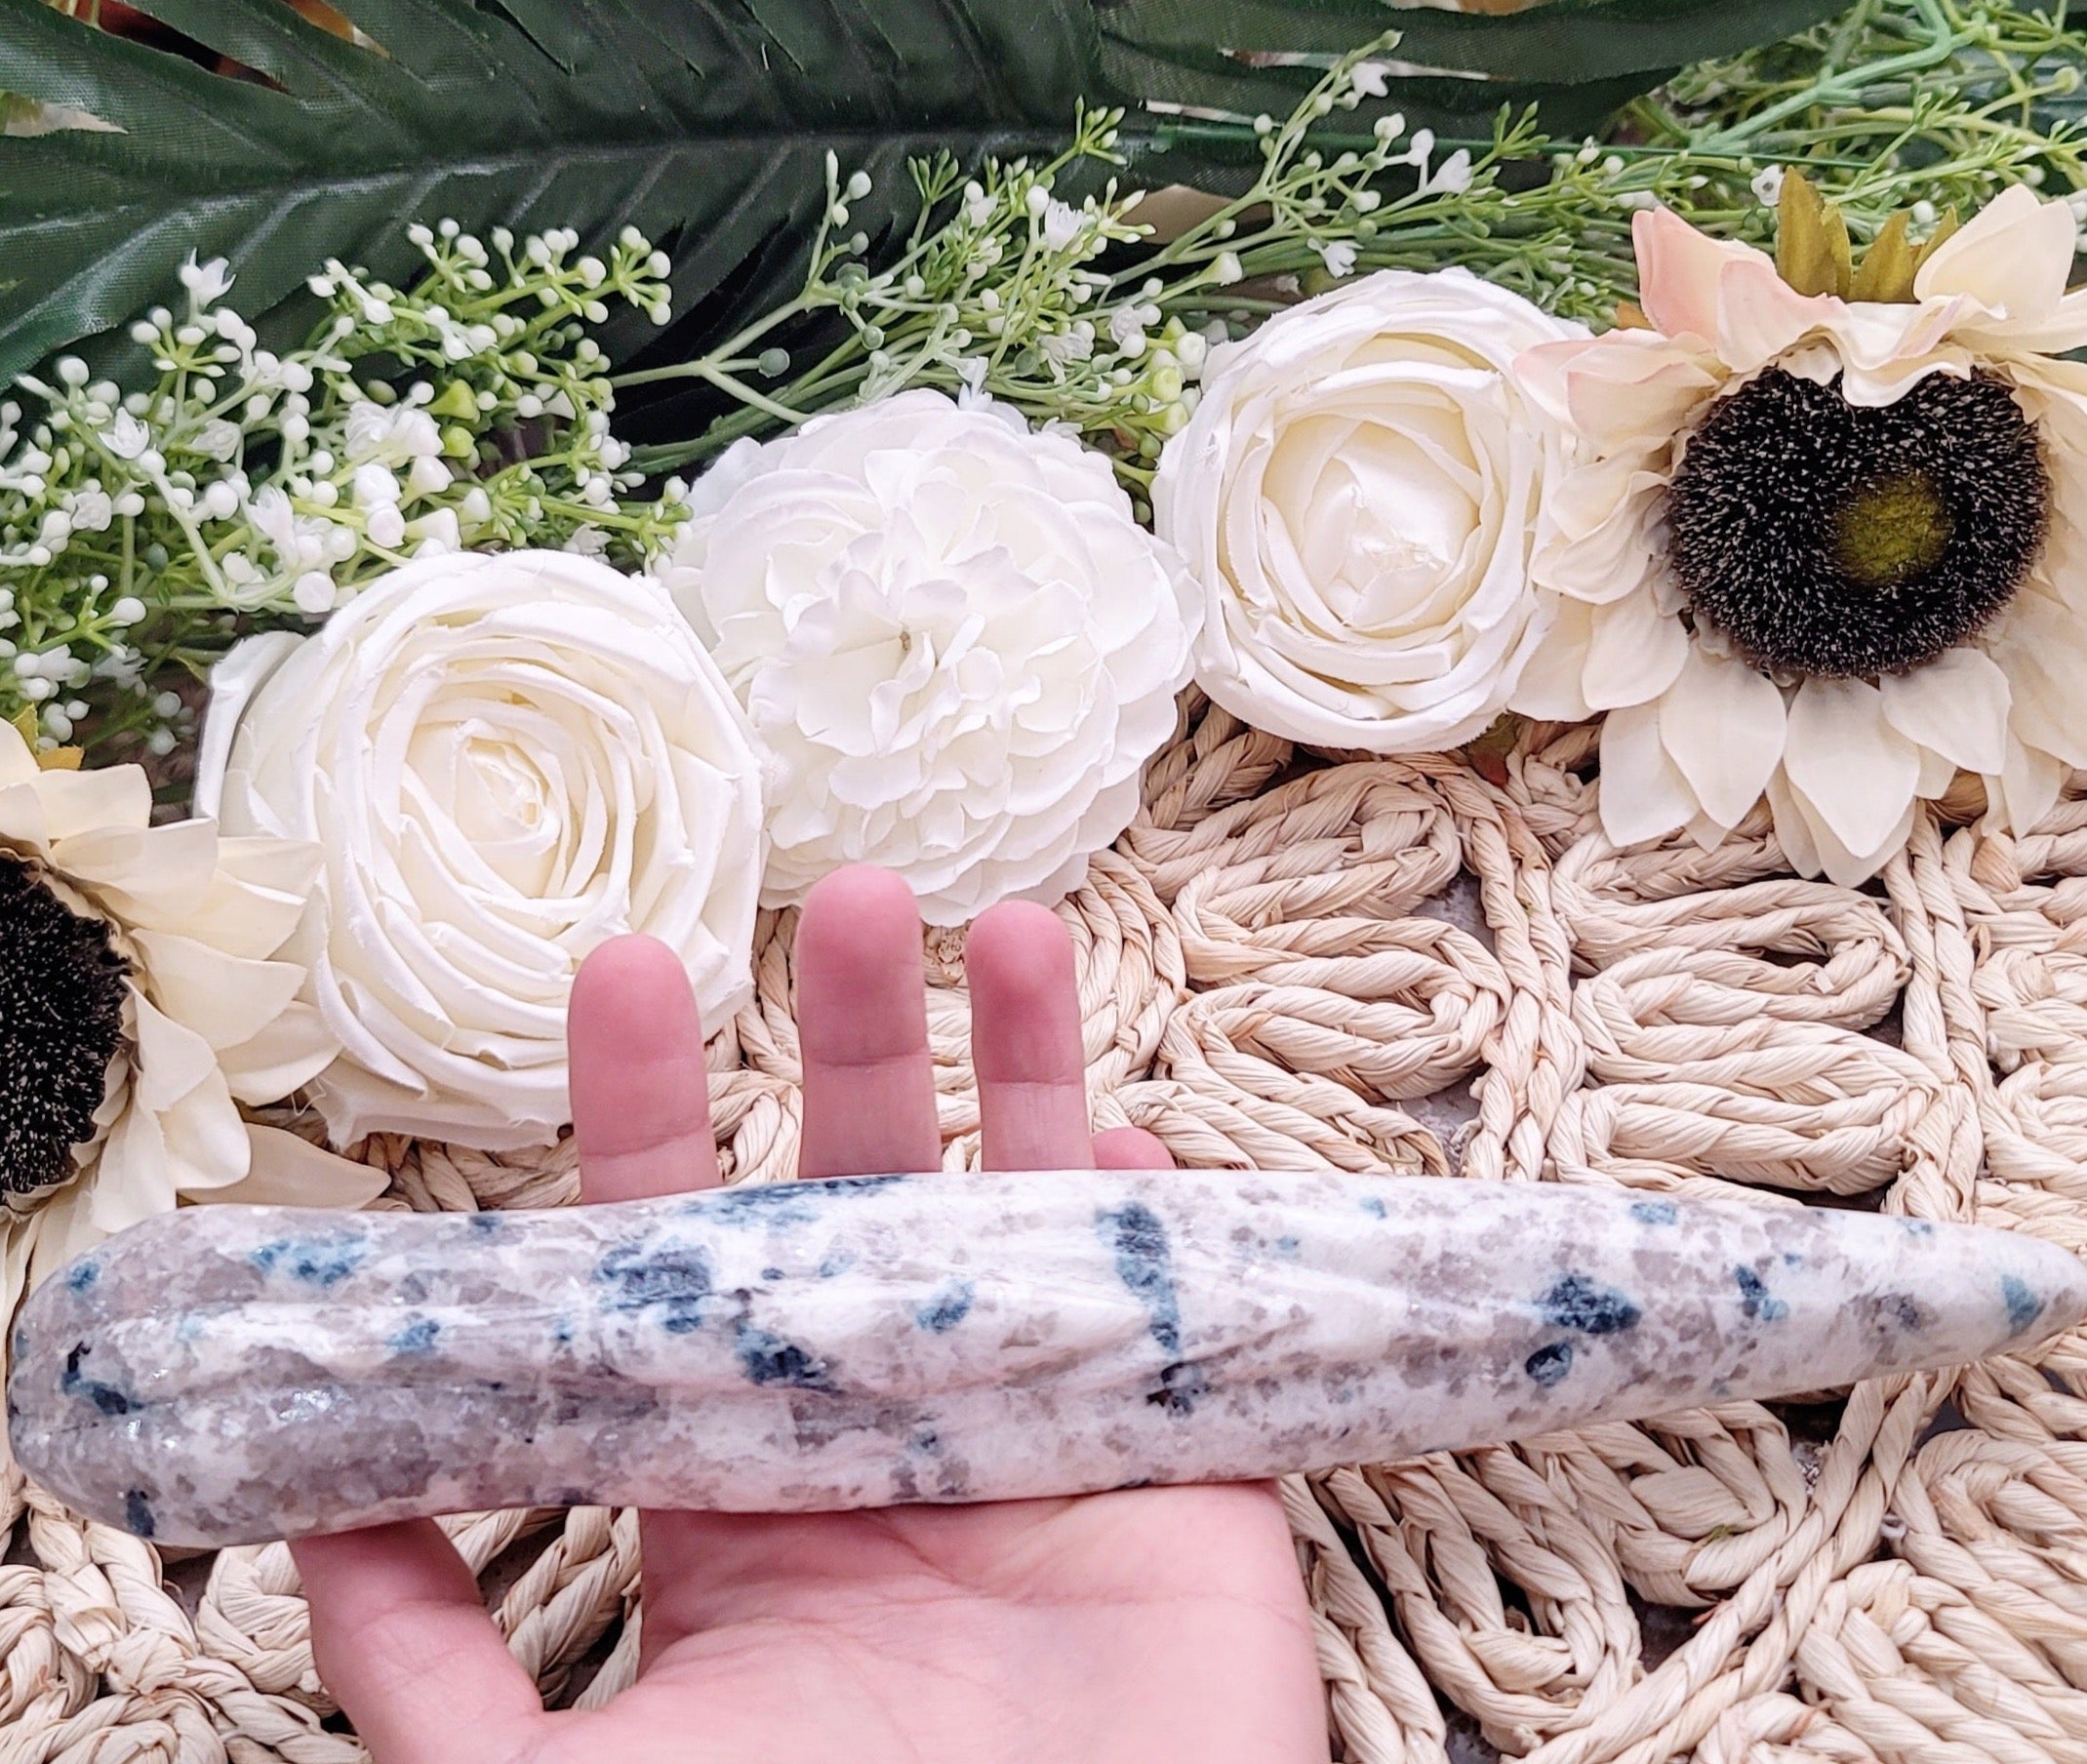 Snowball Euphoralite Serpent Wand For Higher Realms of Consciousness and Heals Emotional Trauma